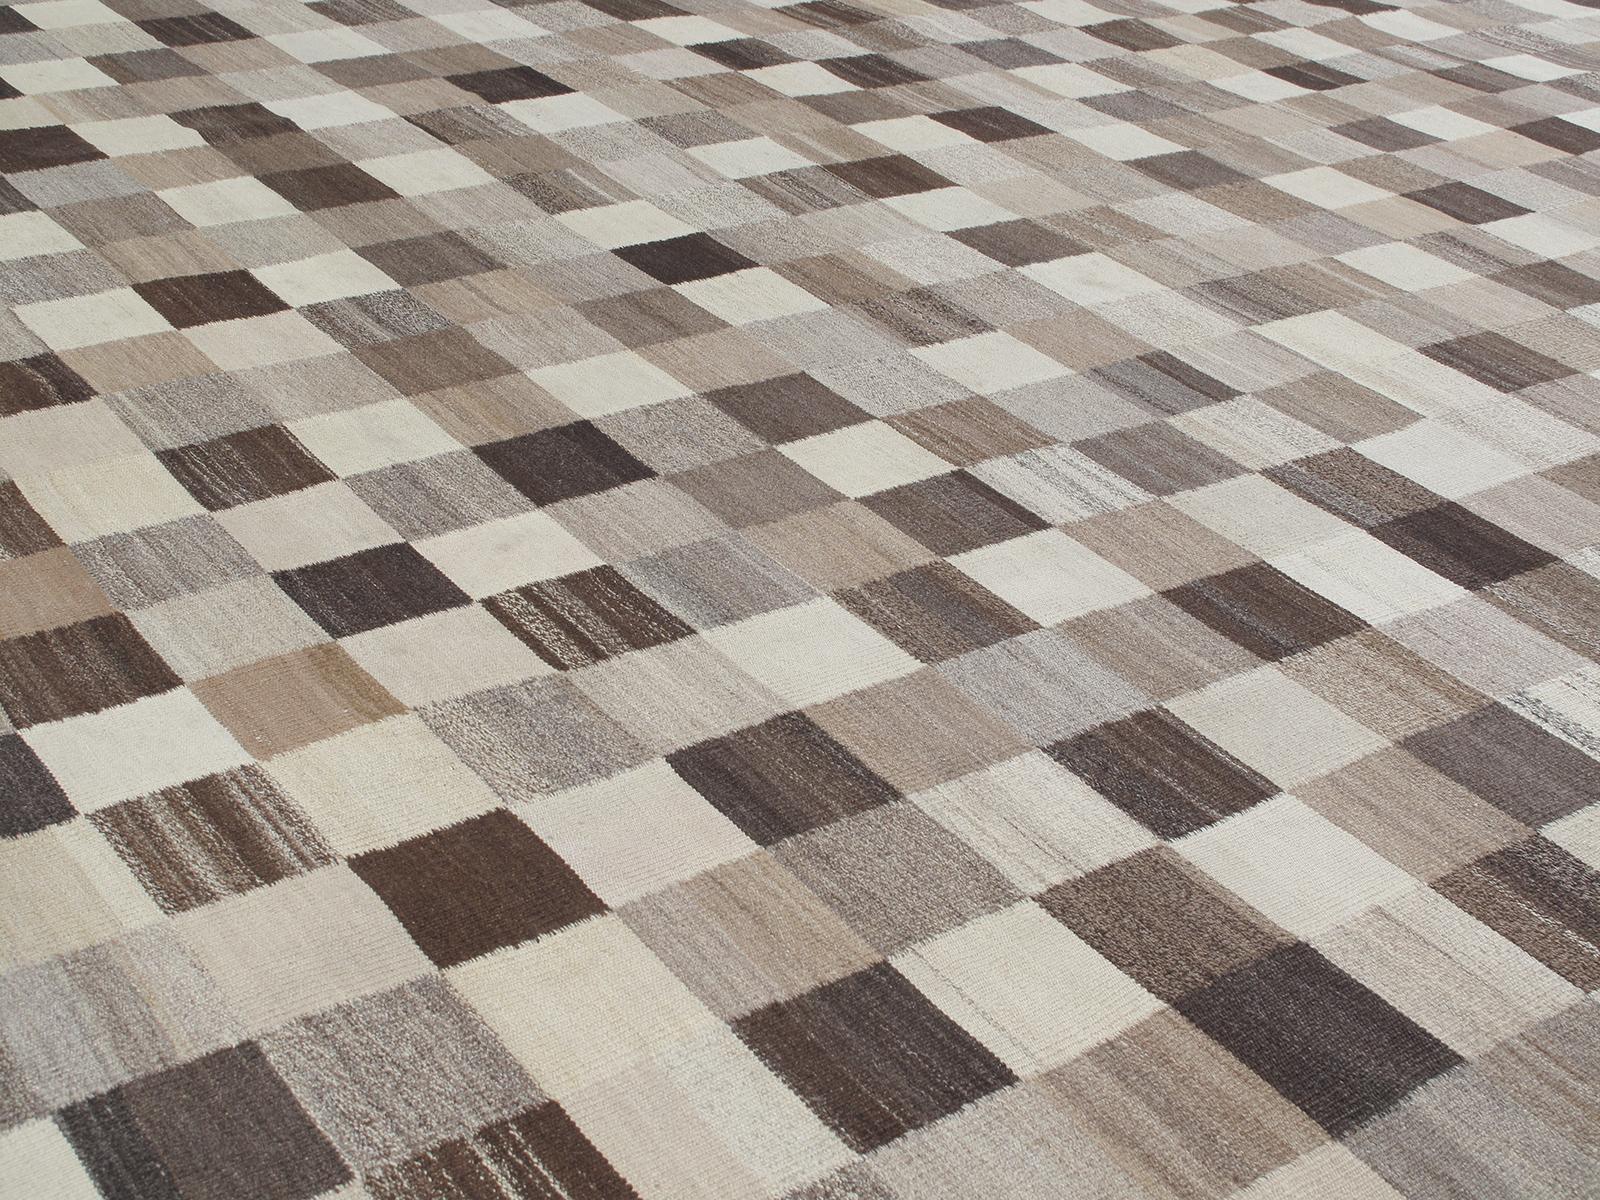 This modern flat-weave rug is made with 100% handspun, non-dyed Persian wool. It features a checkered pattern all made of undyed wool ranging from beige, browns, taupes, and greys. It is inspired by the vintage kilims that are native to the Shiraz